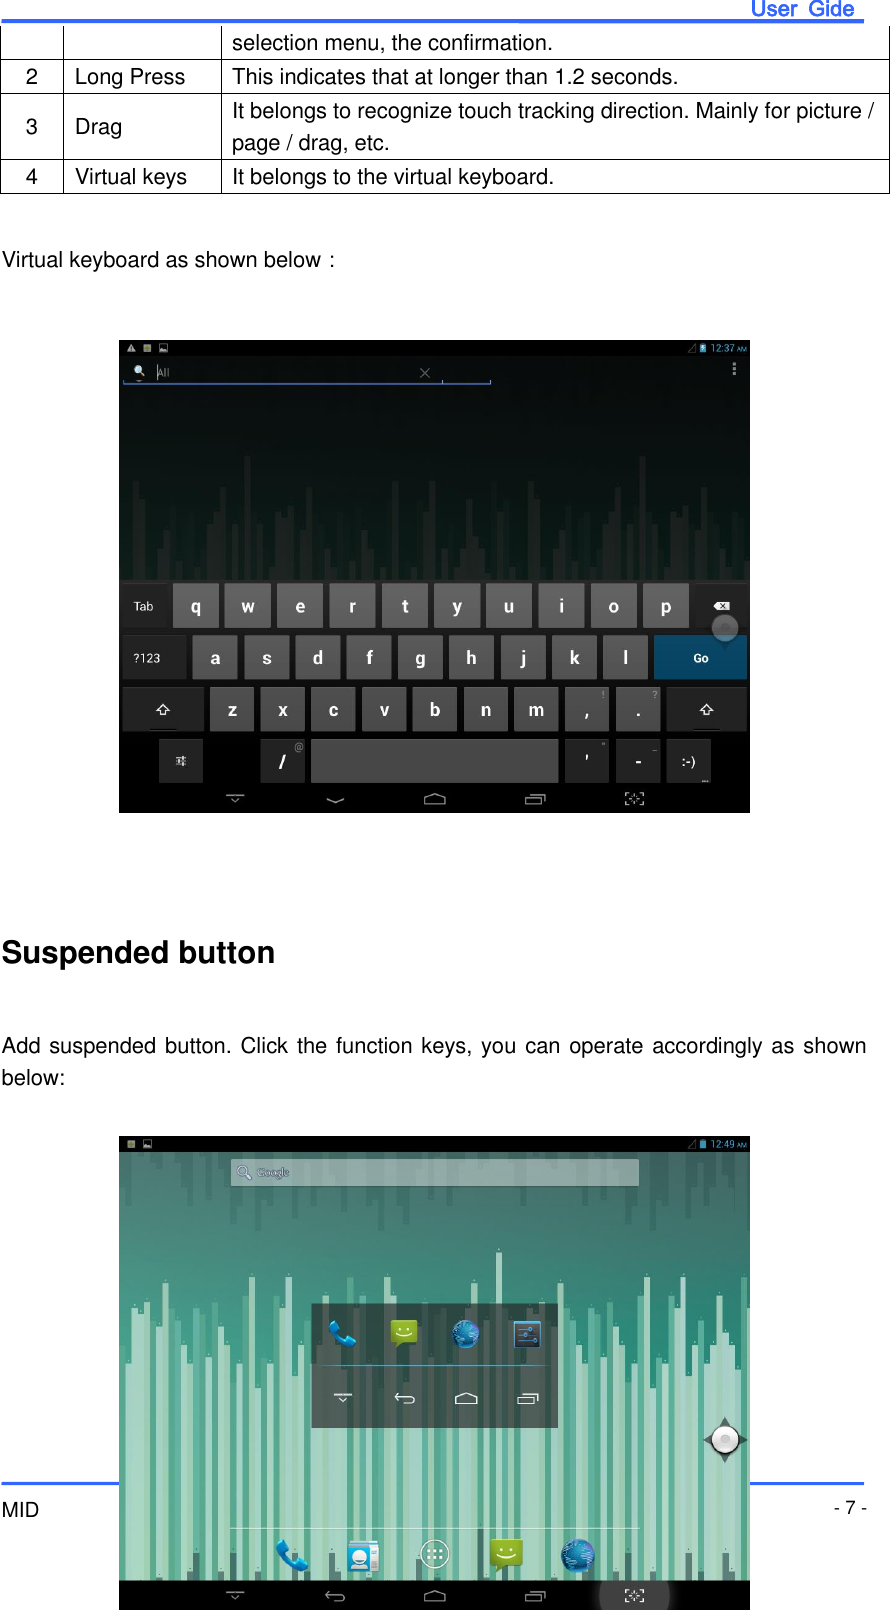                       User  Gide MID - 7 - selection menu, the confirmation. 2 Long Press This indicates that at longer than 1.2 seconds. 3 Drag It belongs to recognize touch tracking direction. Mainly for picture / page / drag, etc. 4 Virtual keys It belongs to the virtual keyboard.  Virtual keyboard as shown below：                    Suspended button  Add suspended button. Click the function keys, you can operate accordingly as shown below:         